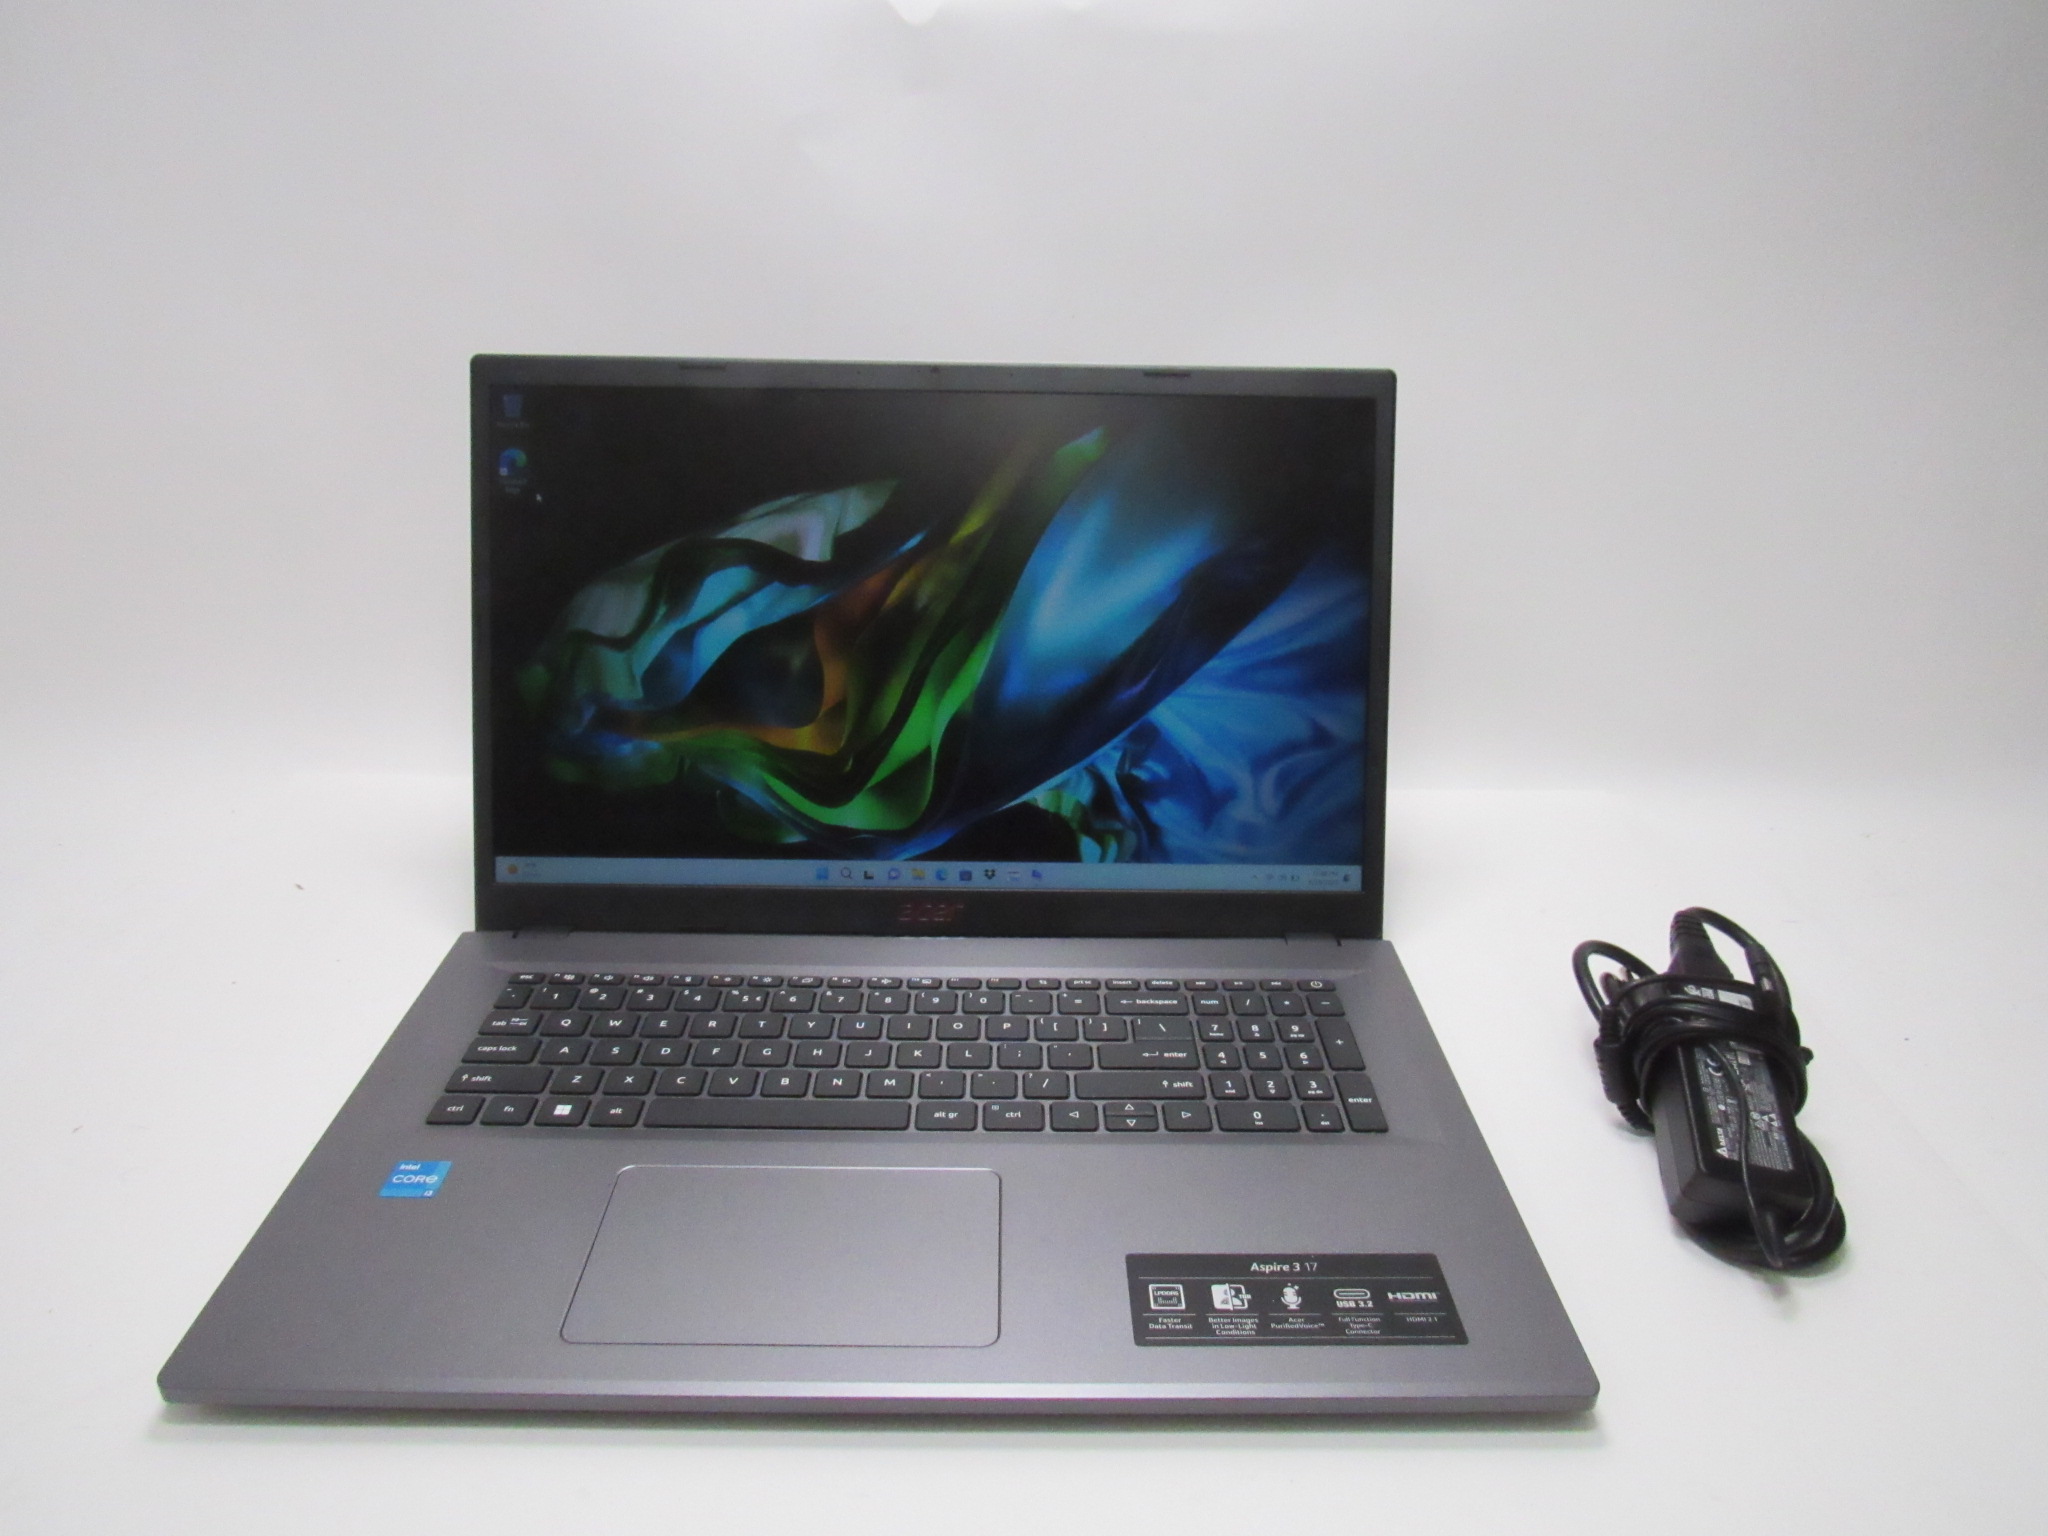 Acer Aspire 3 laptop with Intel Core i3-N305 now available for